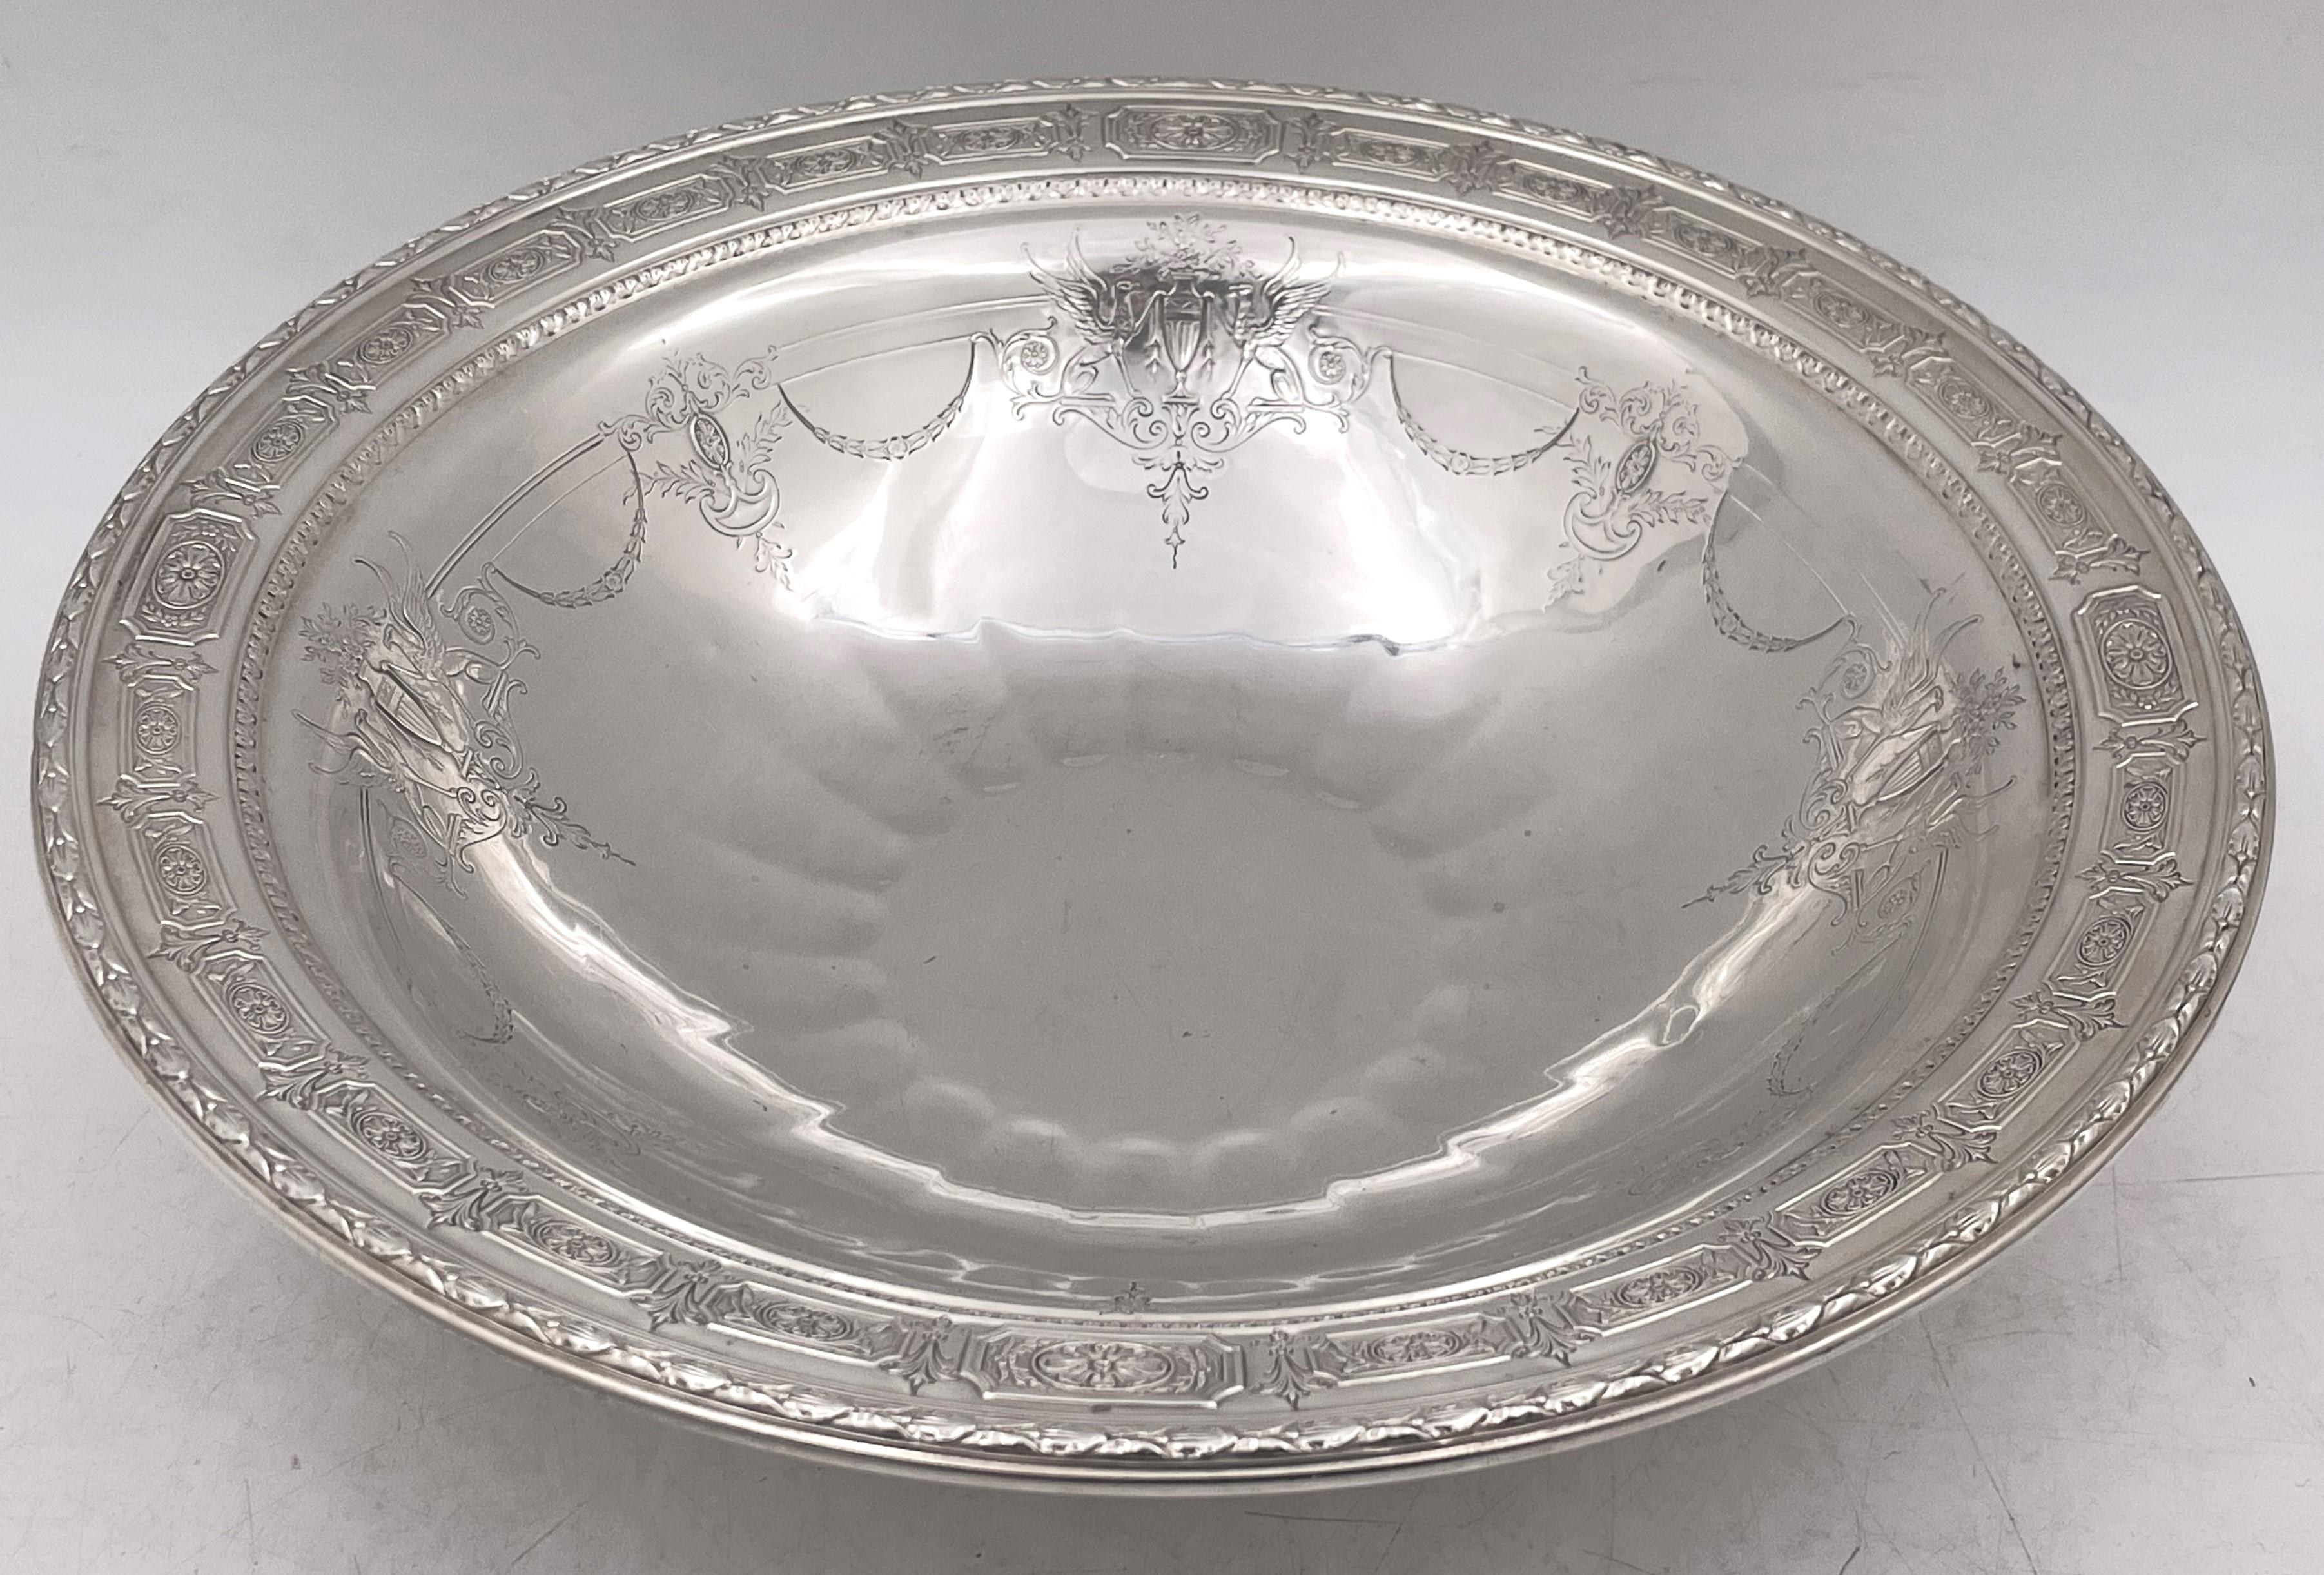 Towle pair of sterling silver centerpiece fruit bowls, beautifully adorned with floral and animals motifs in cartouches and among garlands and friezes. They measure 11'' in diameter by 3 3/8'' in height, weigh 35.2 troy ounces in total, and bear